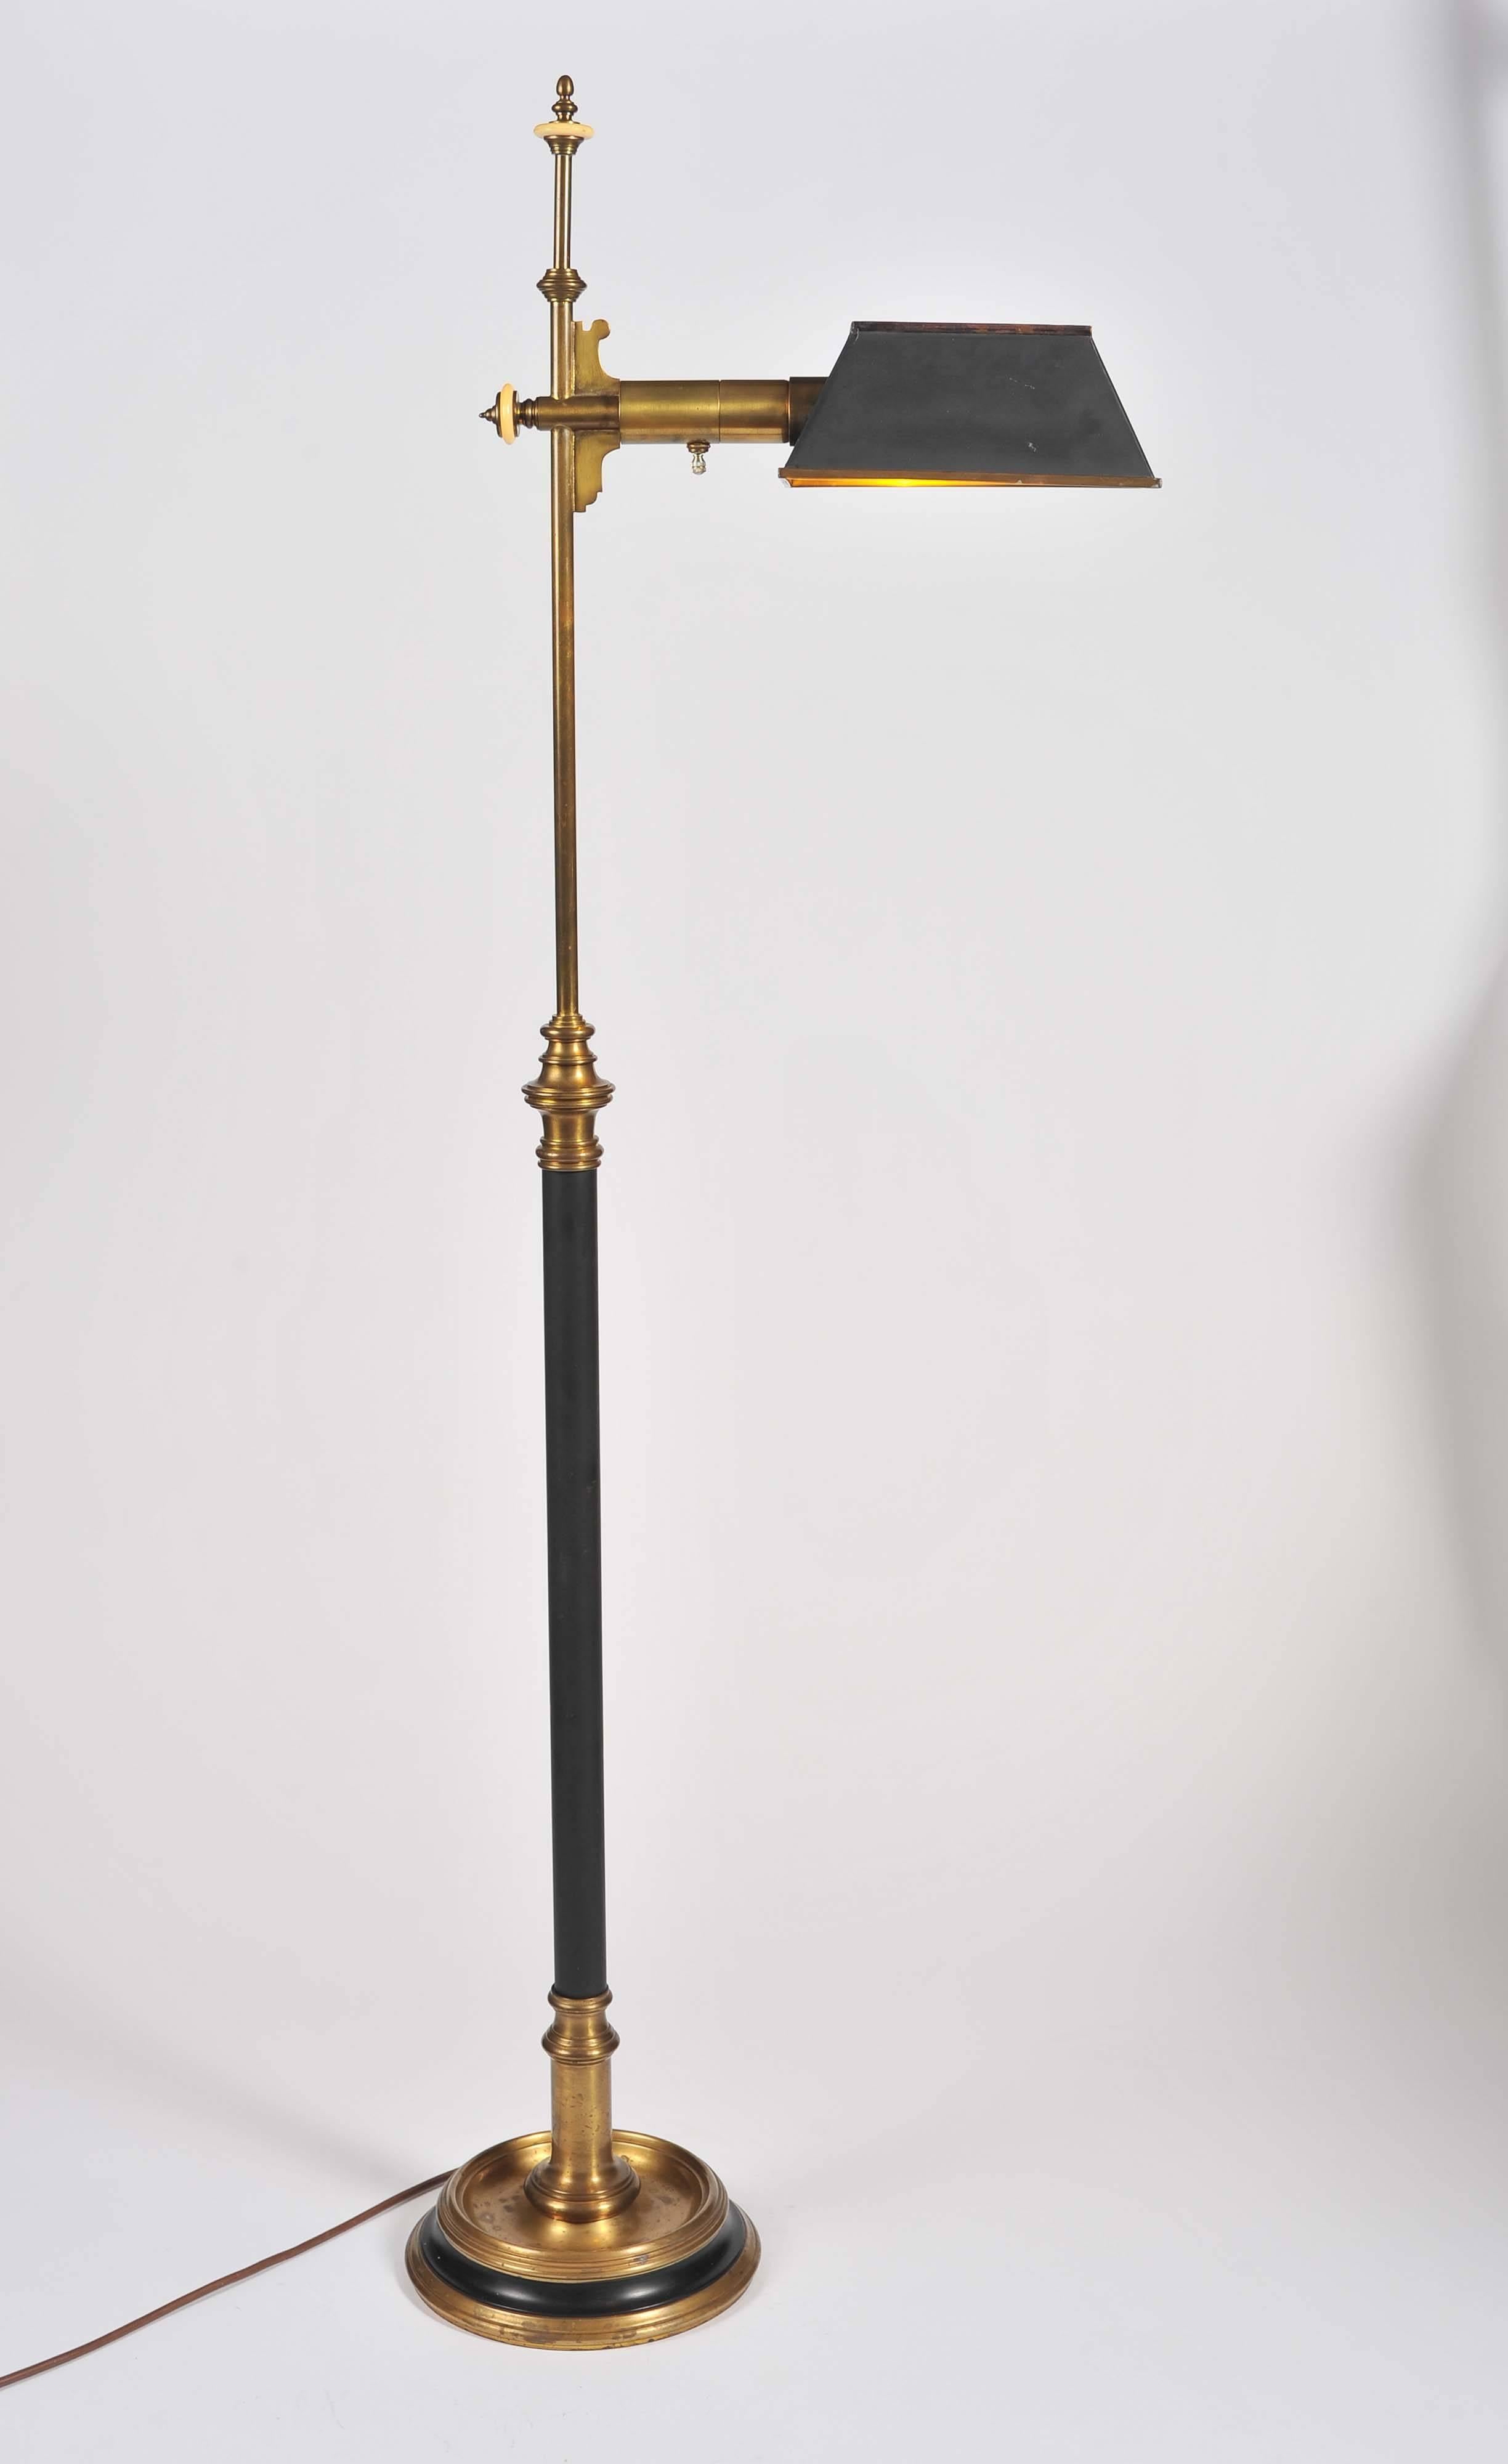 A very elegant brass Chapman standard lamp with rotating adjustable rectangular toleware shade.